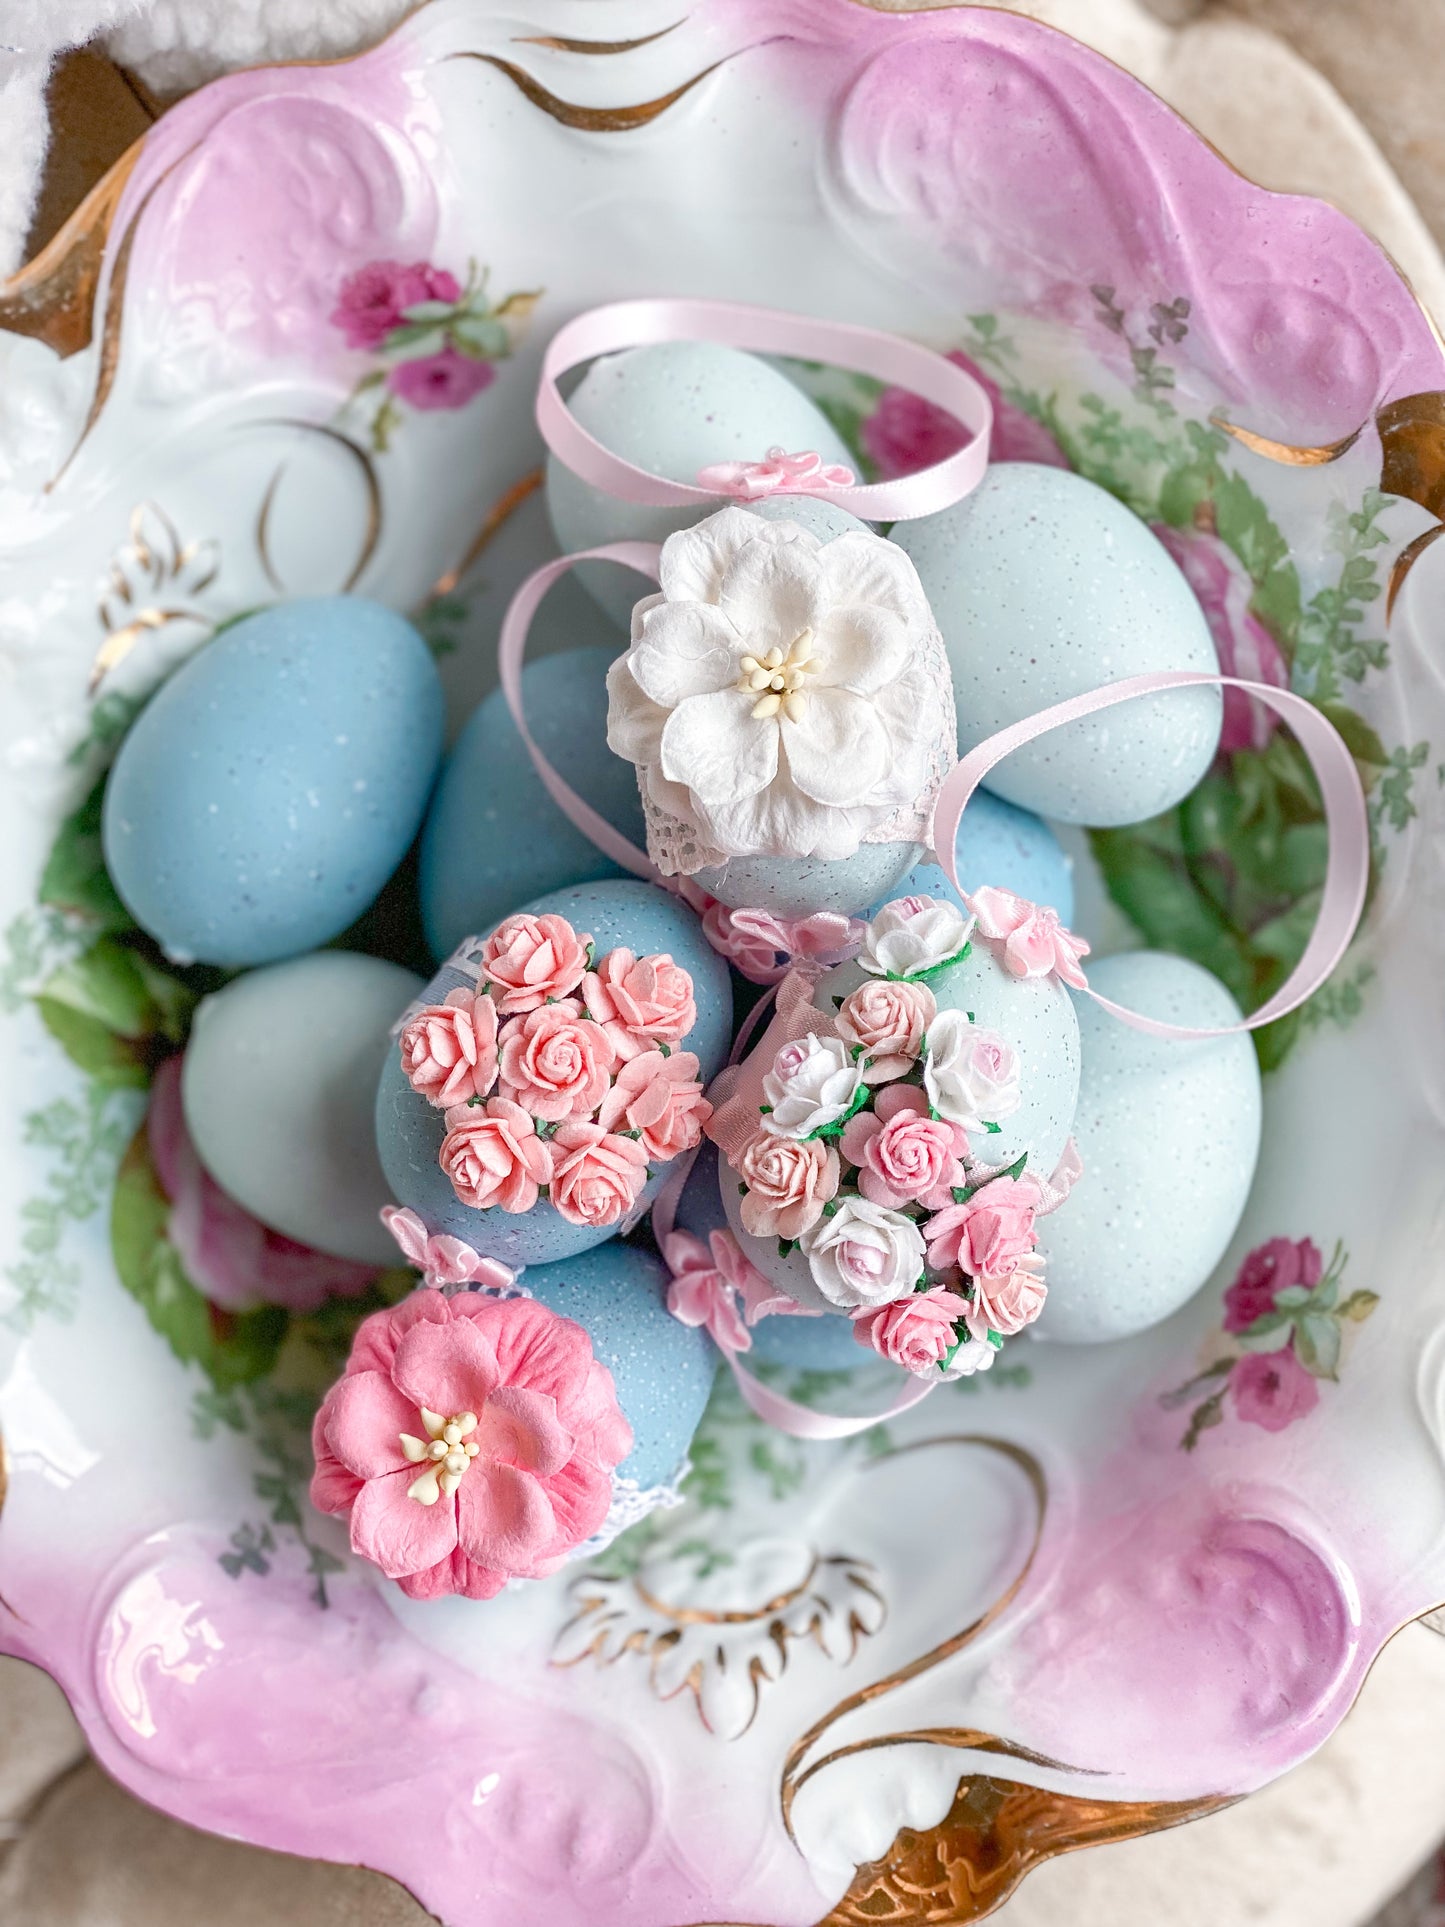 Set of 4 Bespoke Handmade Shabby Chic Pastel Blue and Pink Egg Ornaments